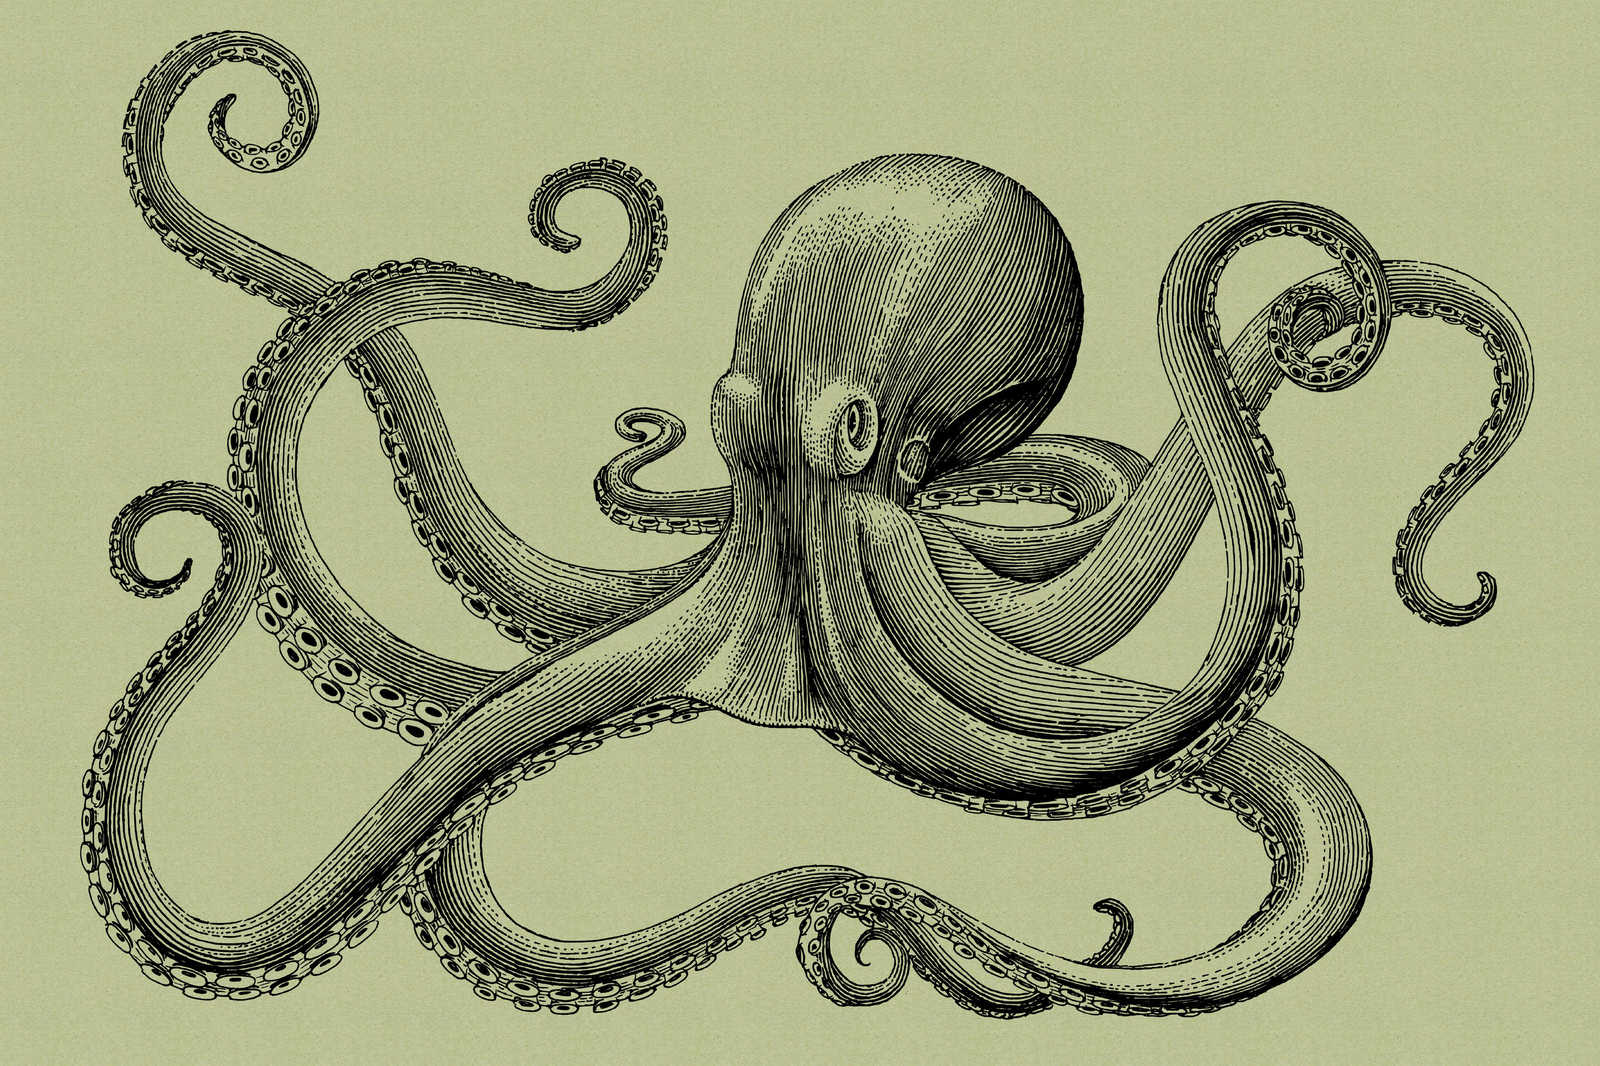             Jules 3 - Canvas painting Octopus in Sketch Style & Vintage Look- Cardboard Structure - 0.90 m x 0.60 m
        